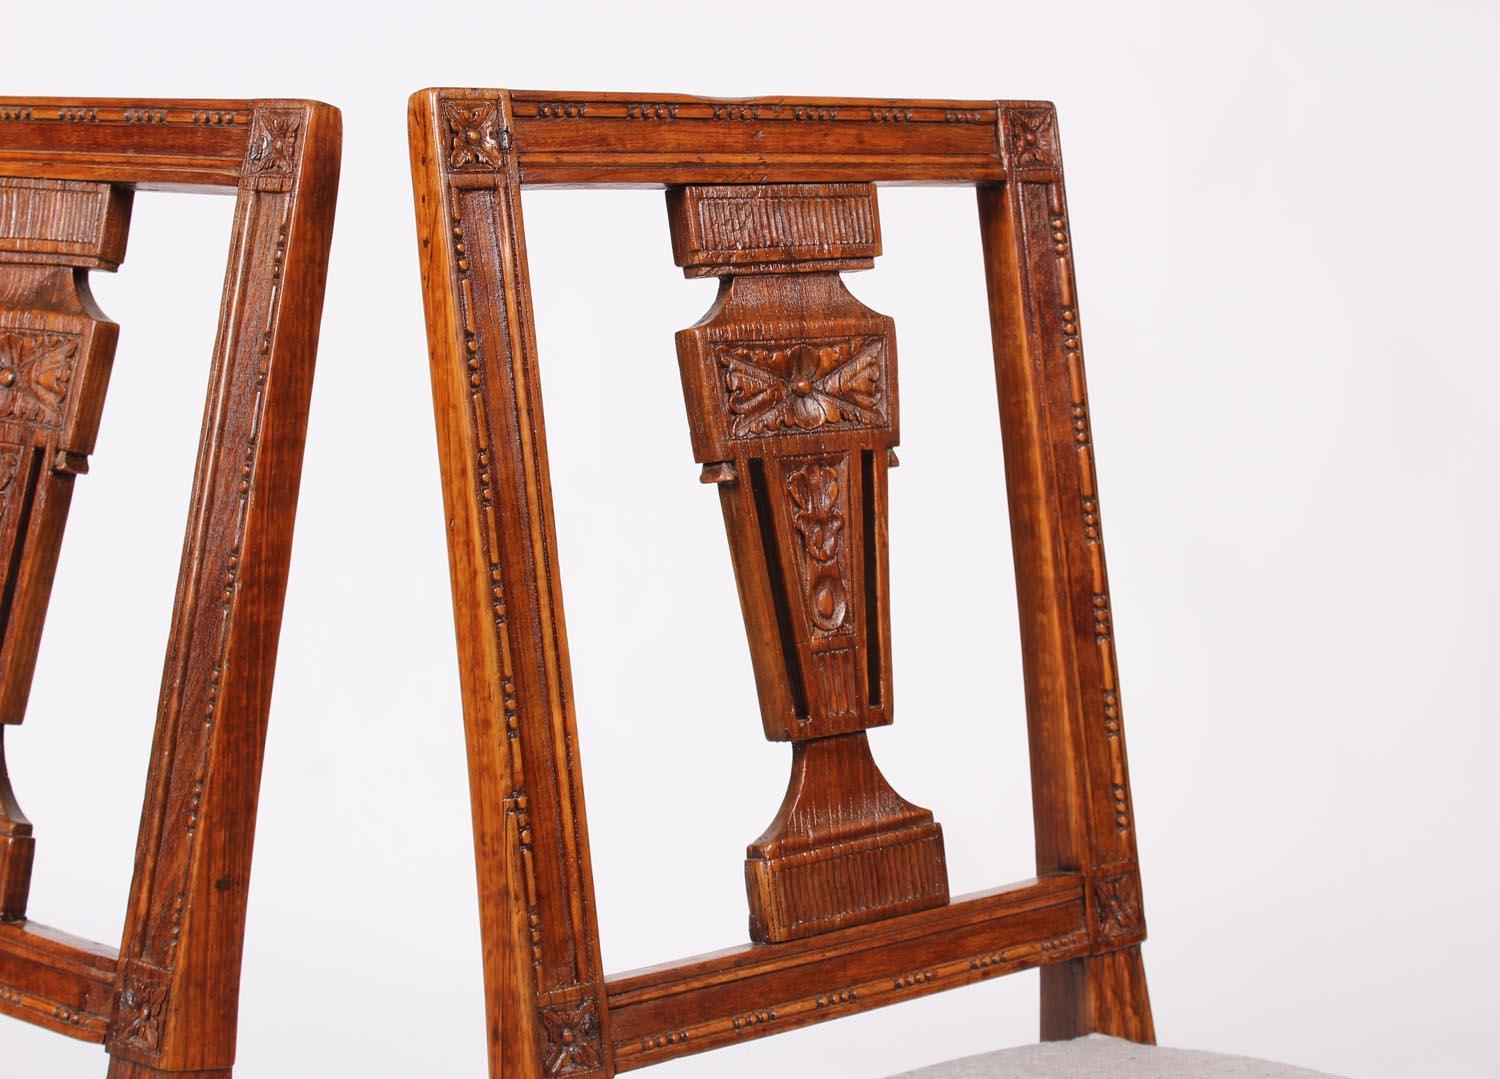 Carved Pair of Two German Louis XVI Chairs, Walnut, Saxonia, Late 18th Century